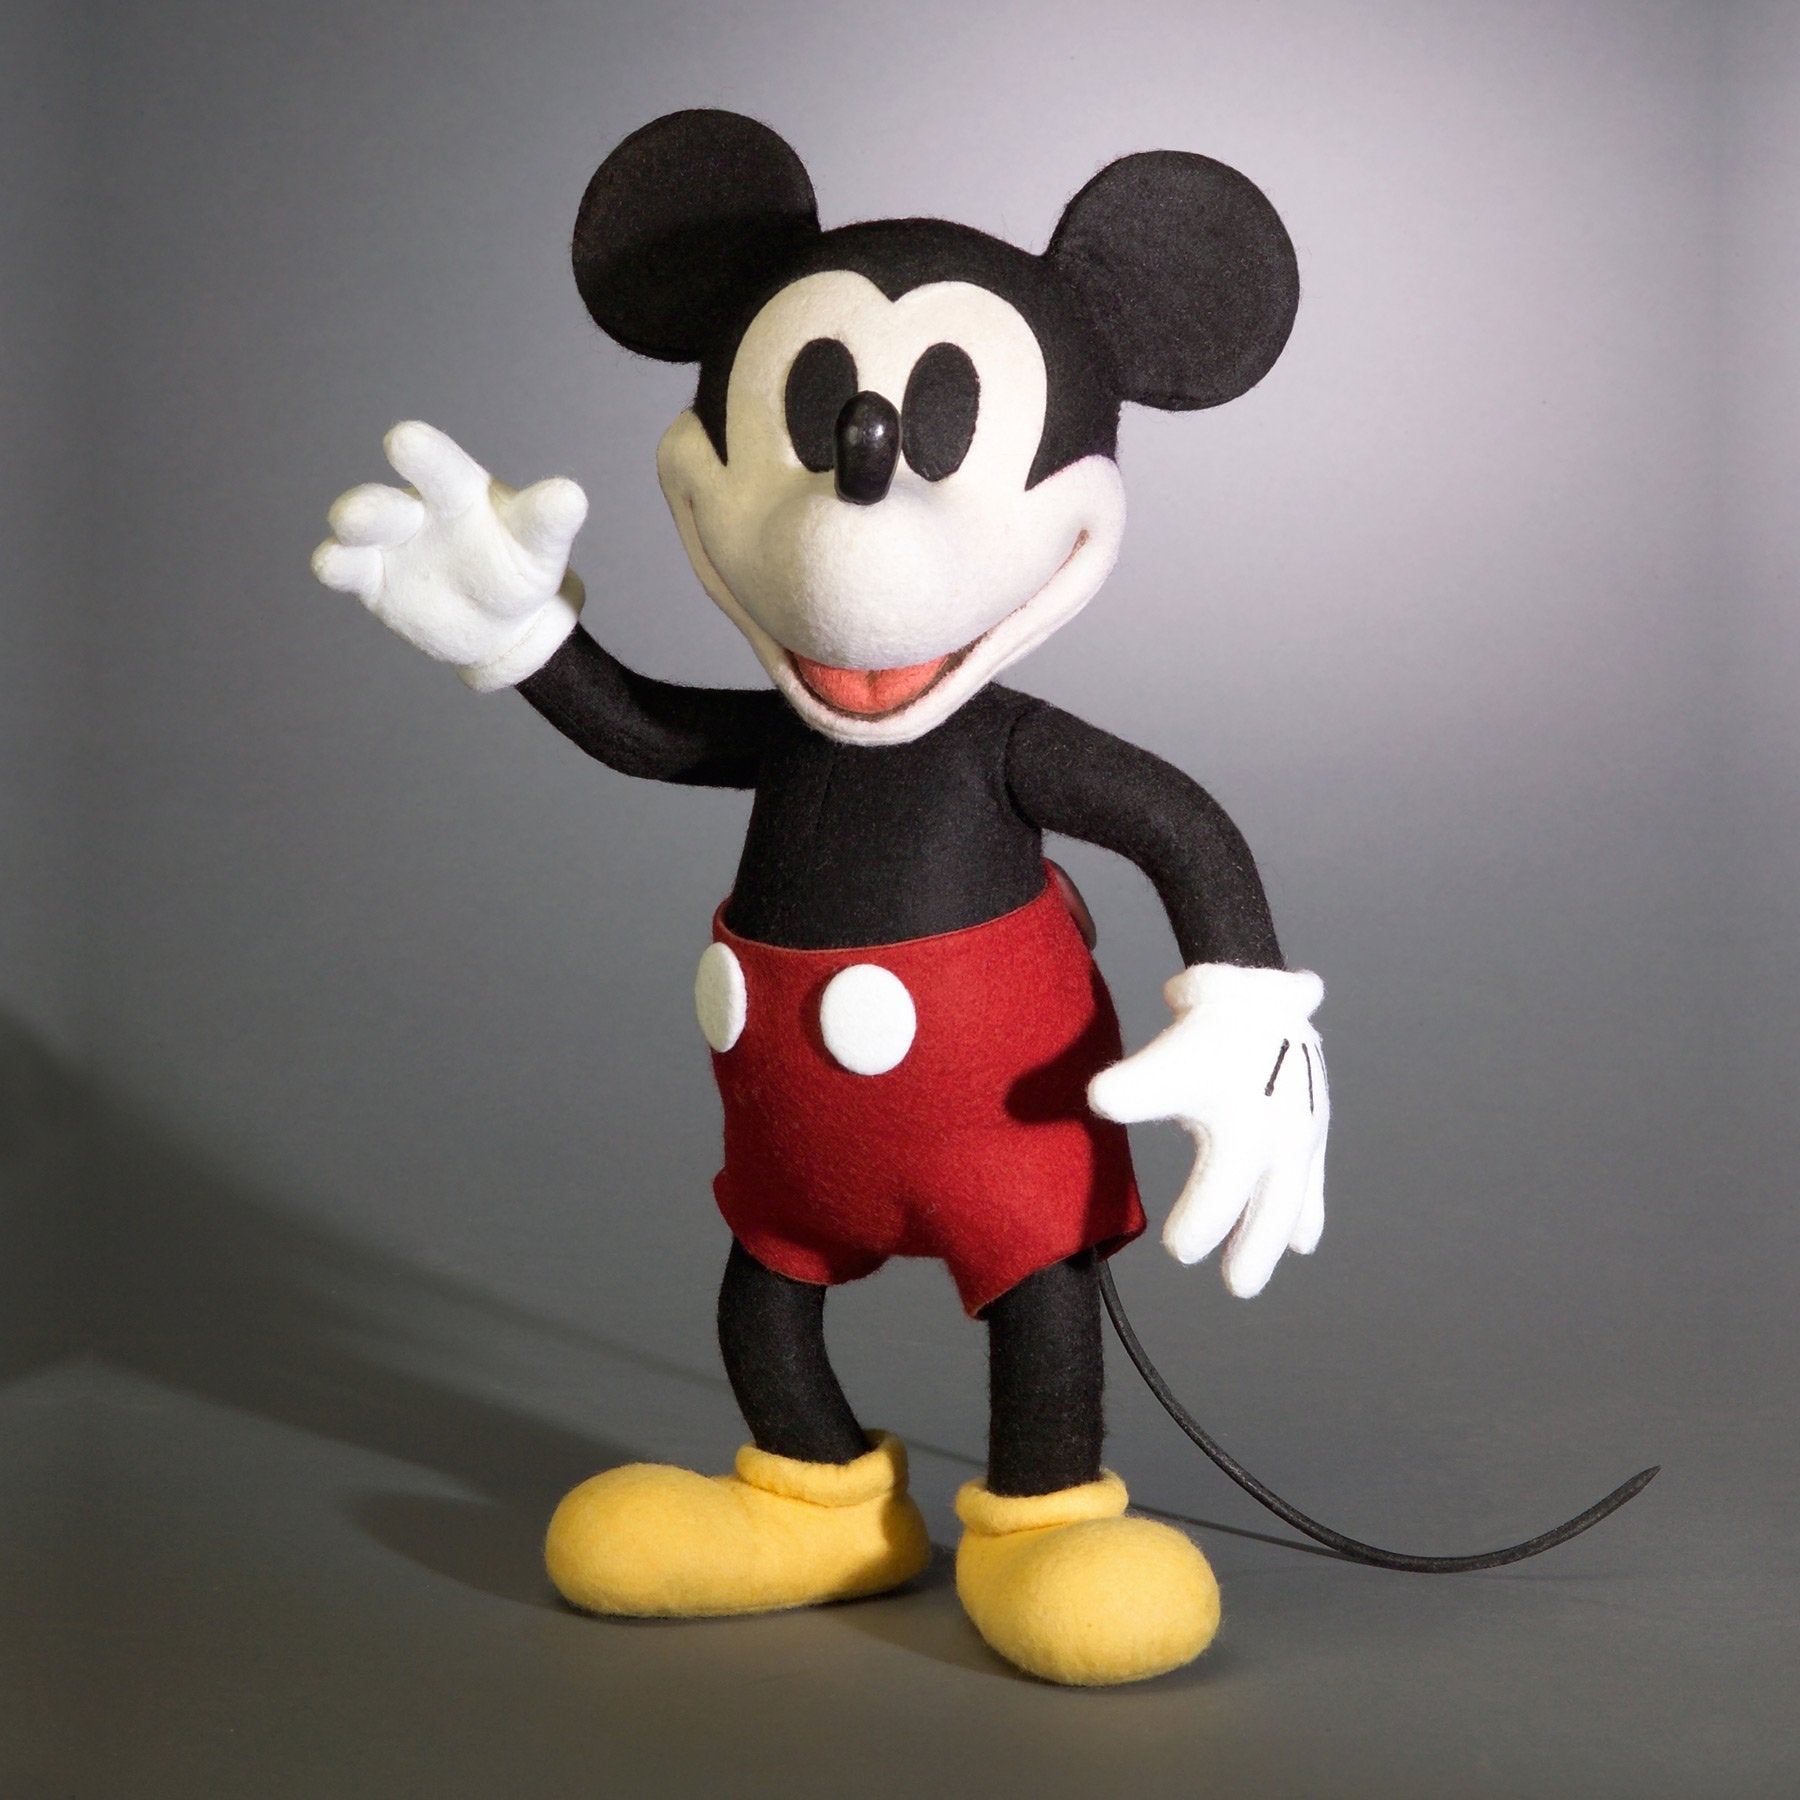 r mickey mouse